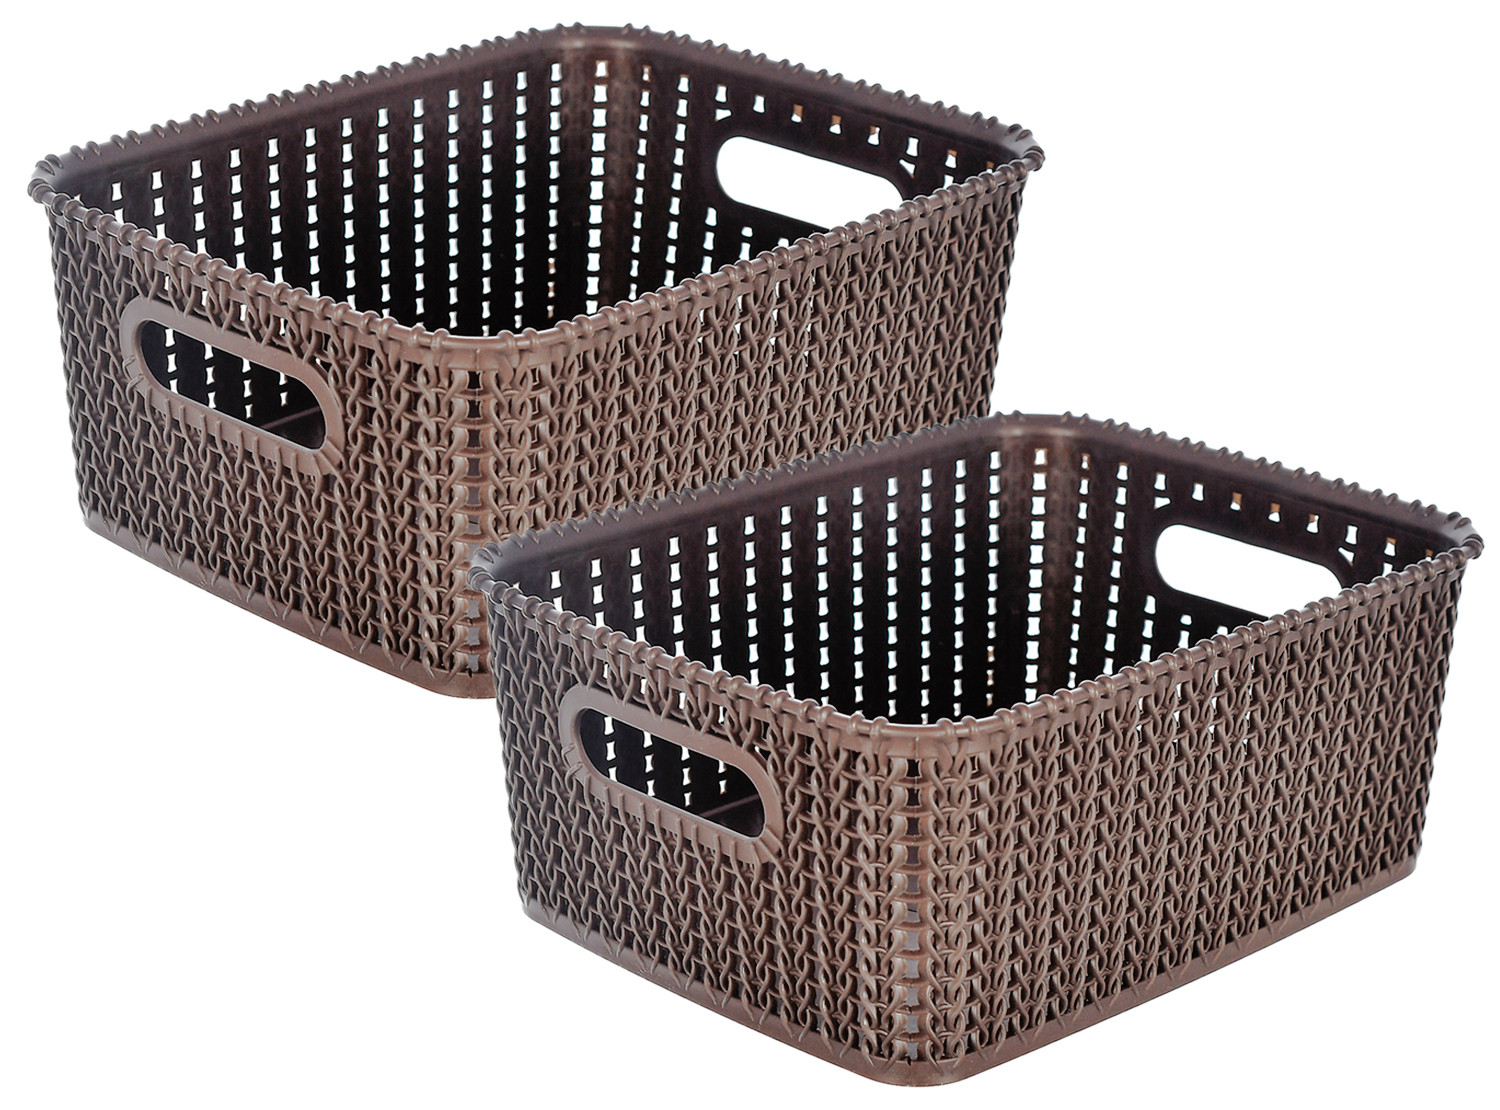 Kuber Industries Multiuses Large M 20 Plastic Tray/Basket/Organizer Without Lid (Brown) -46KM085